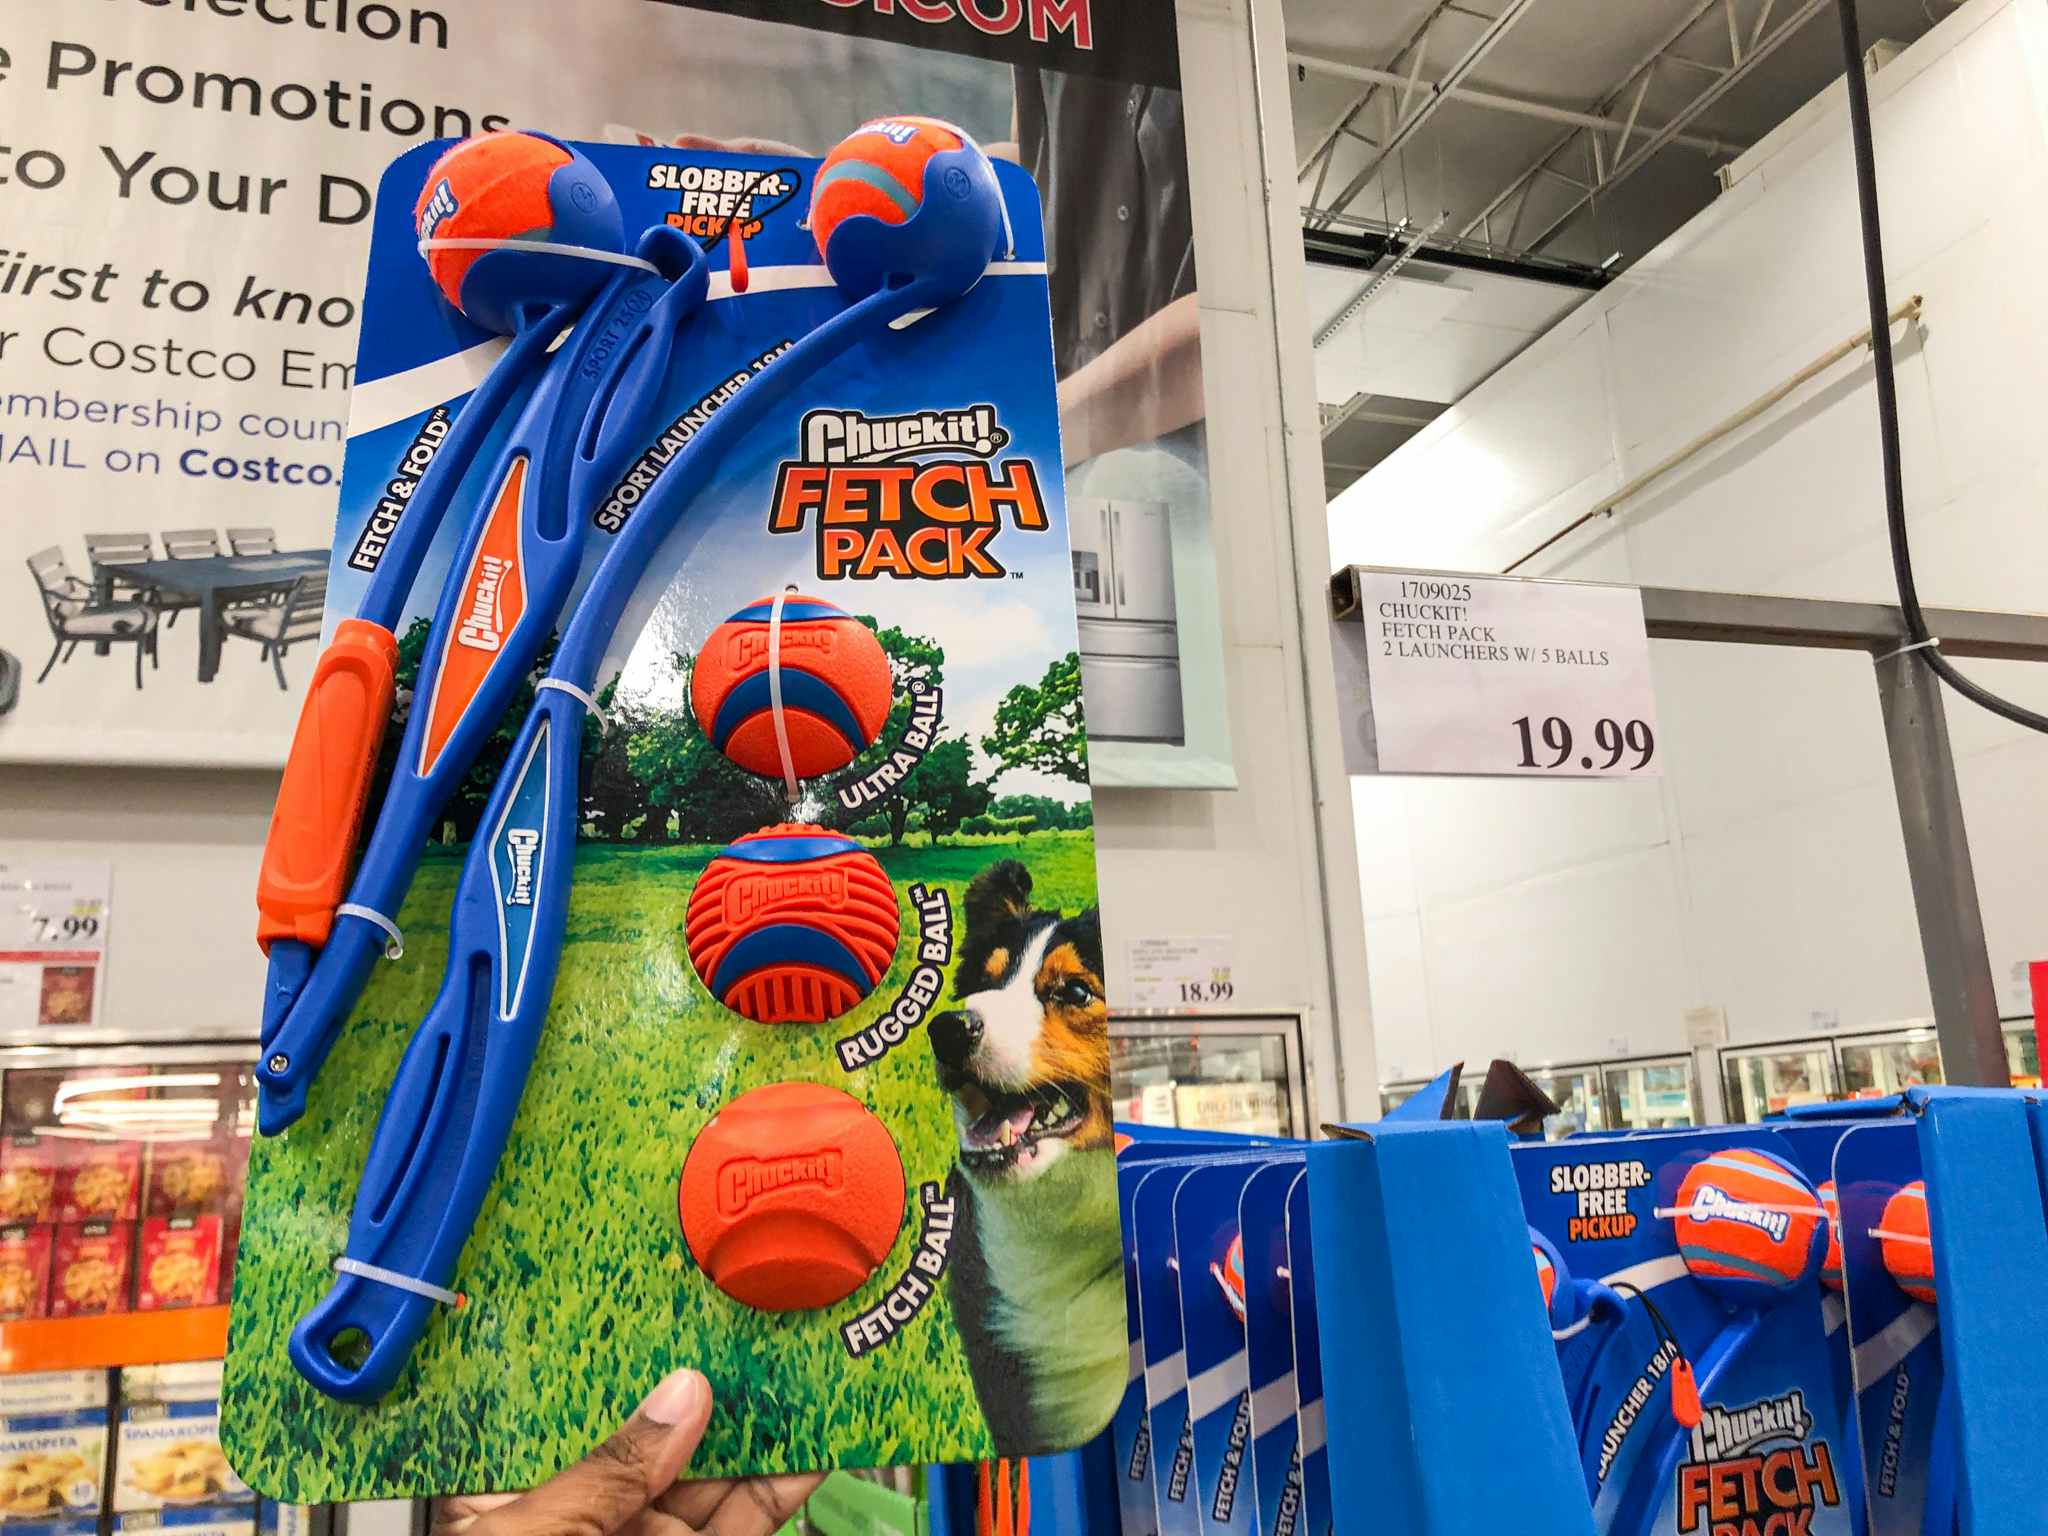 chuck it fetch pack by a sign for $19.99